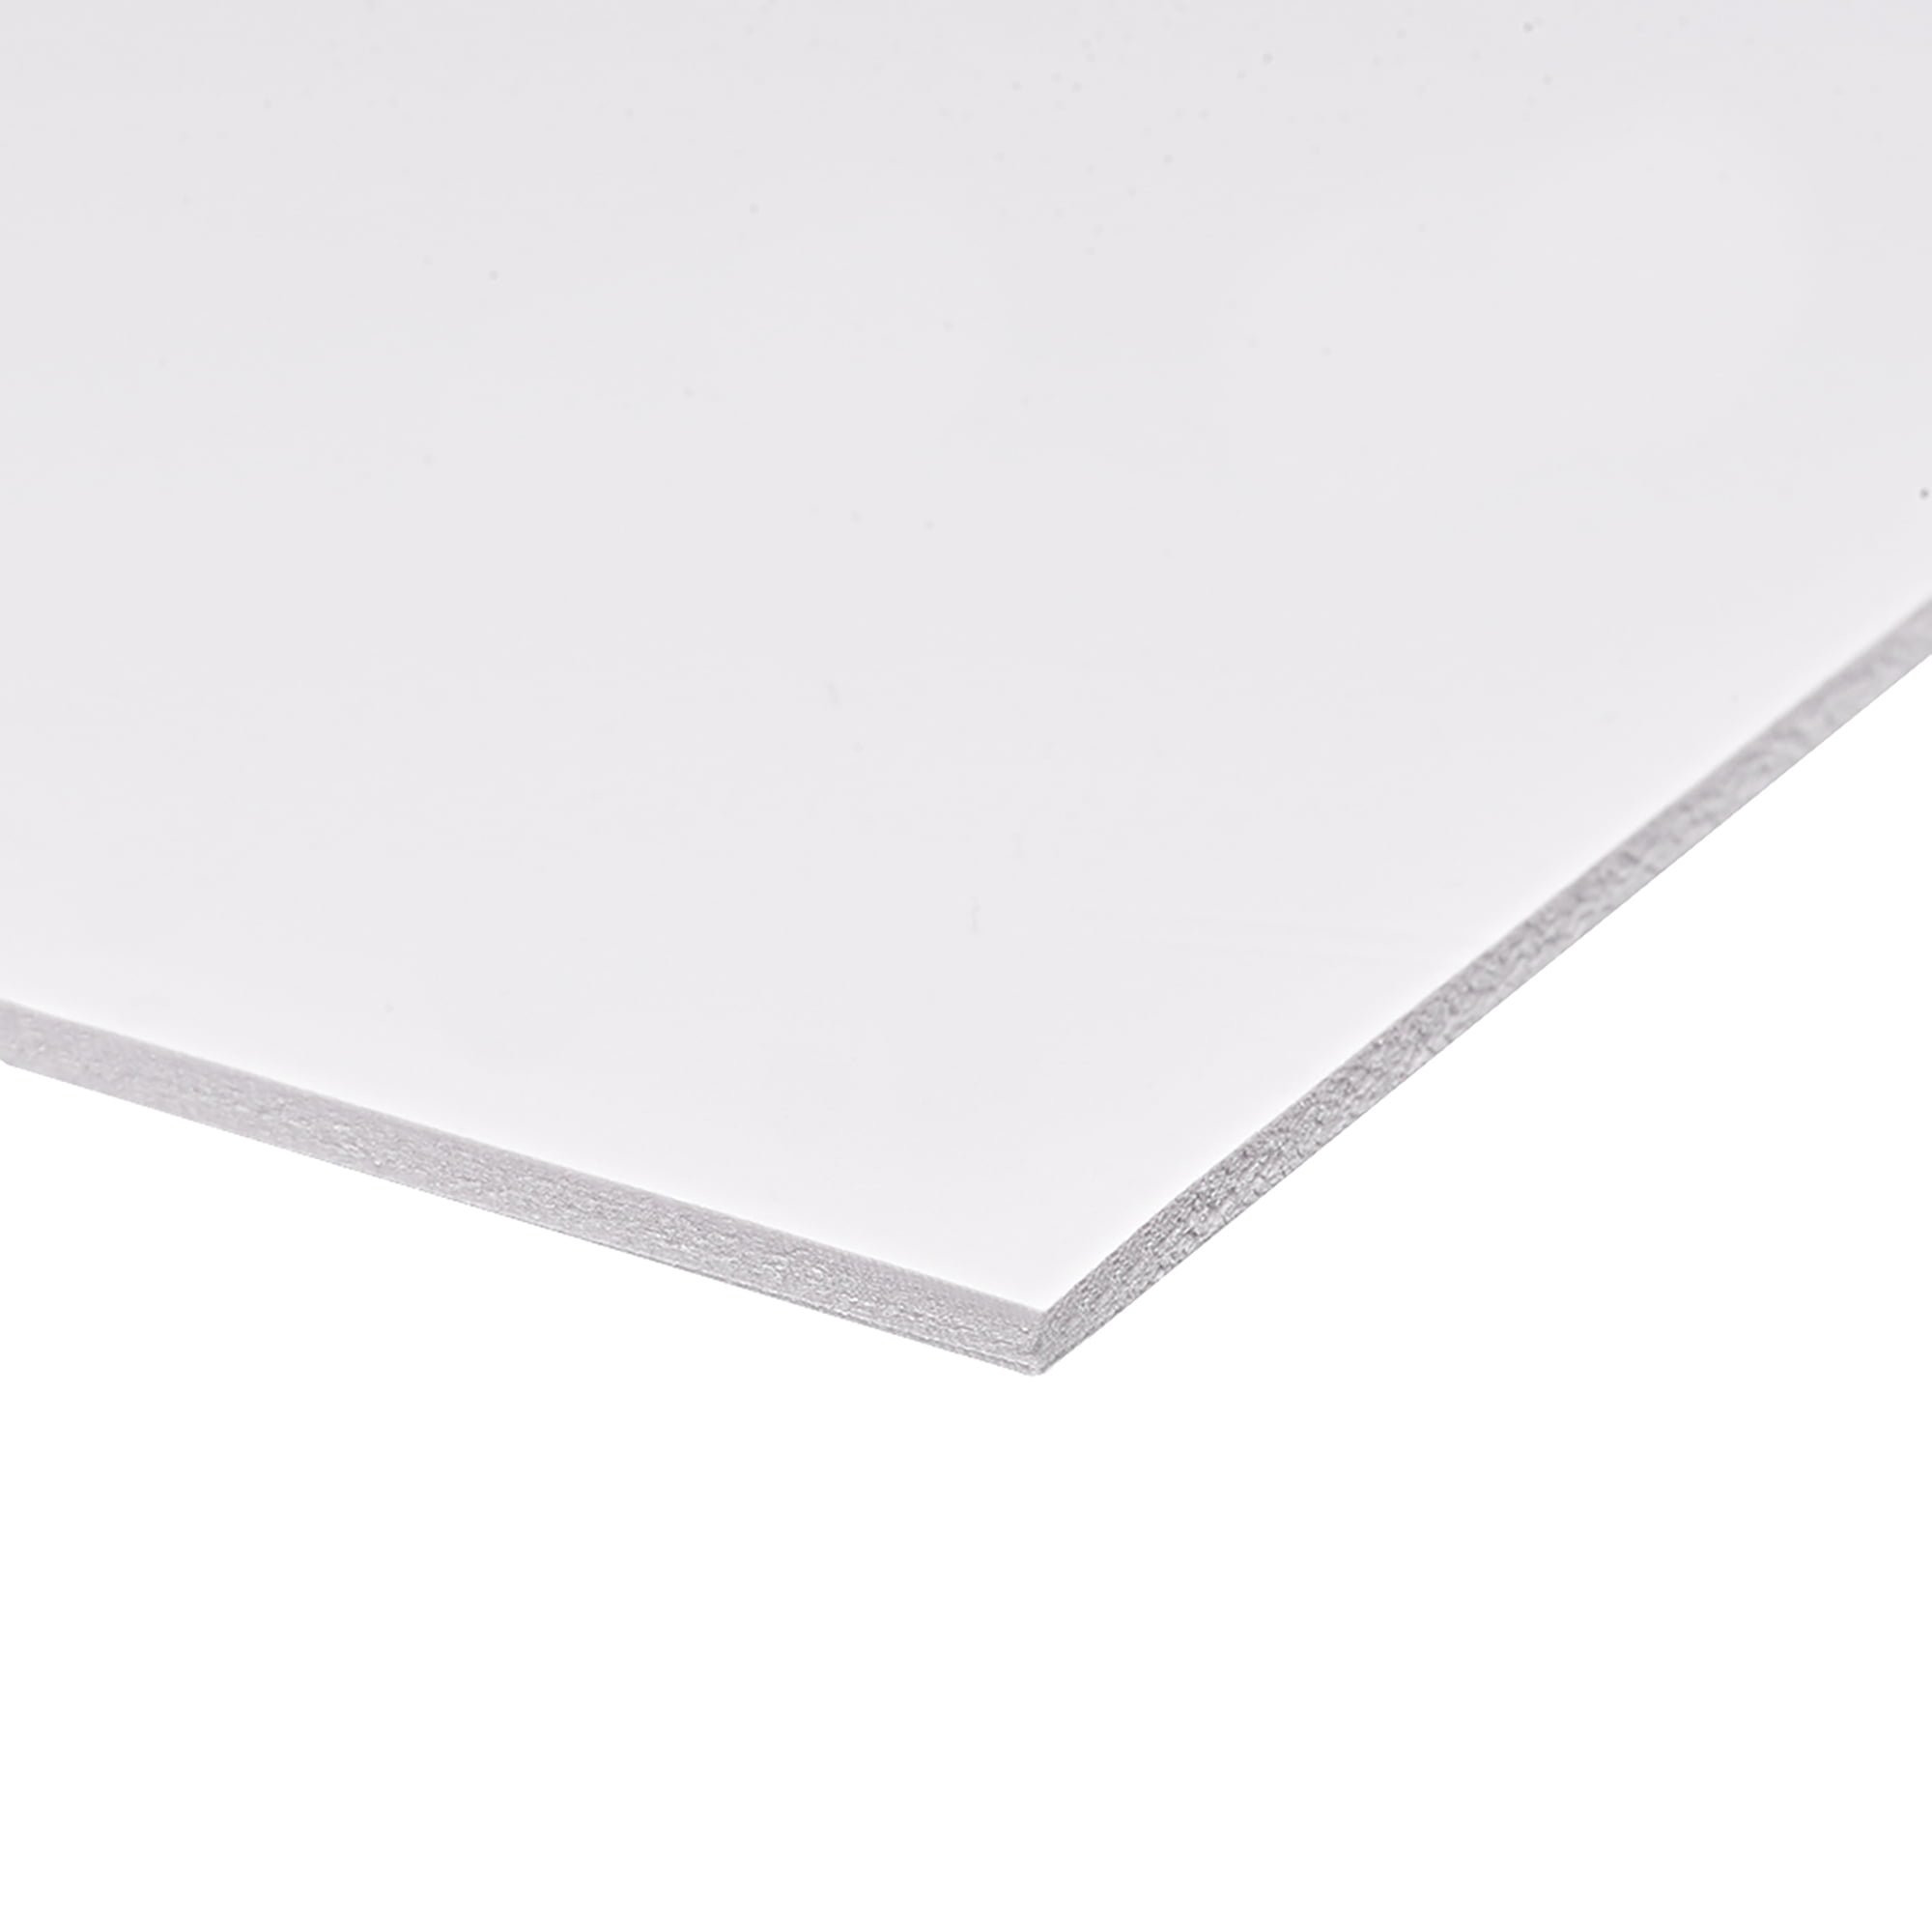 Details about   PVC Foam Board Sheet,3mm T x 8"W x12“L,Red,Double Sided,Expanded PVC Sheet 